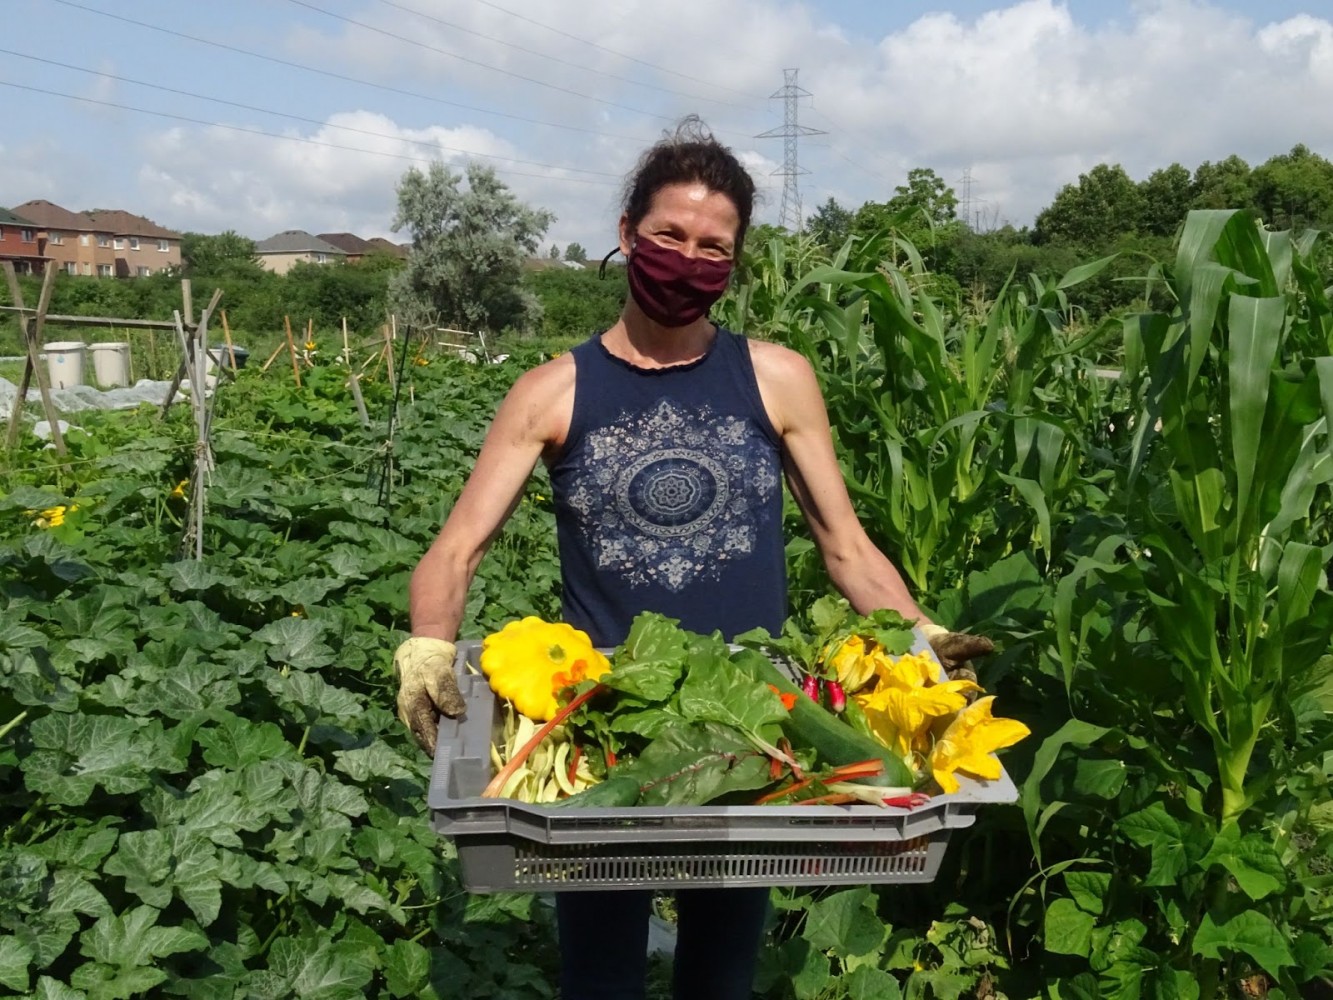 Residents create ‘intimate relationships’ with food by growing their own in community gardens